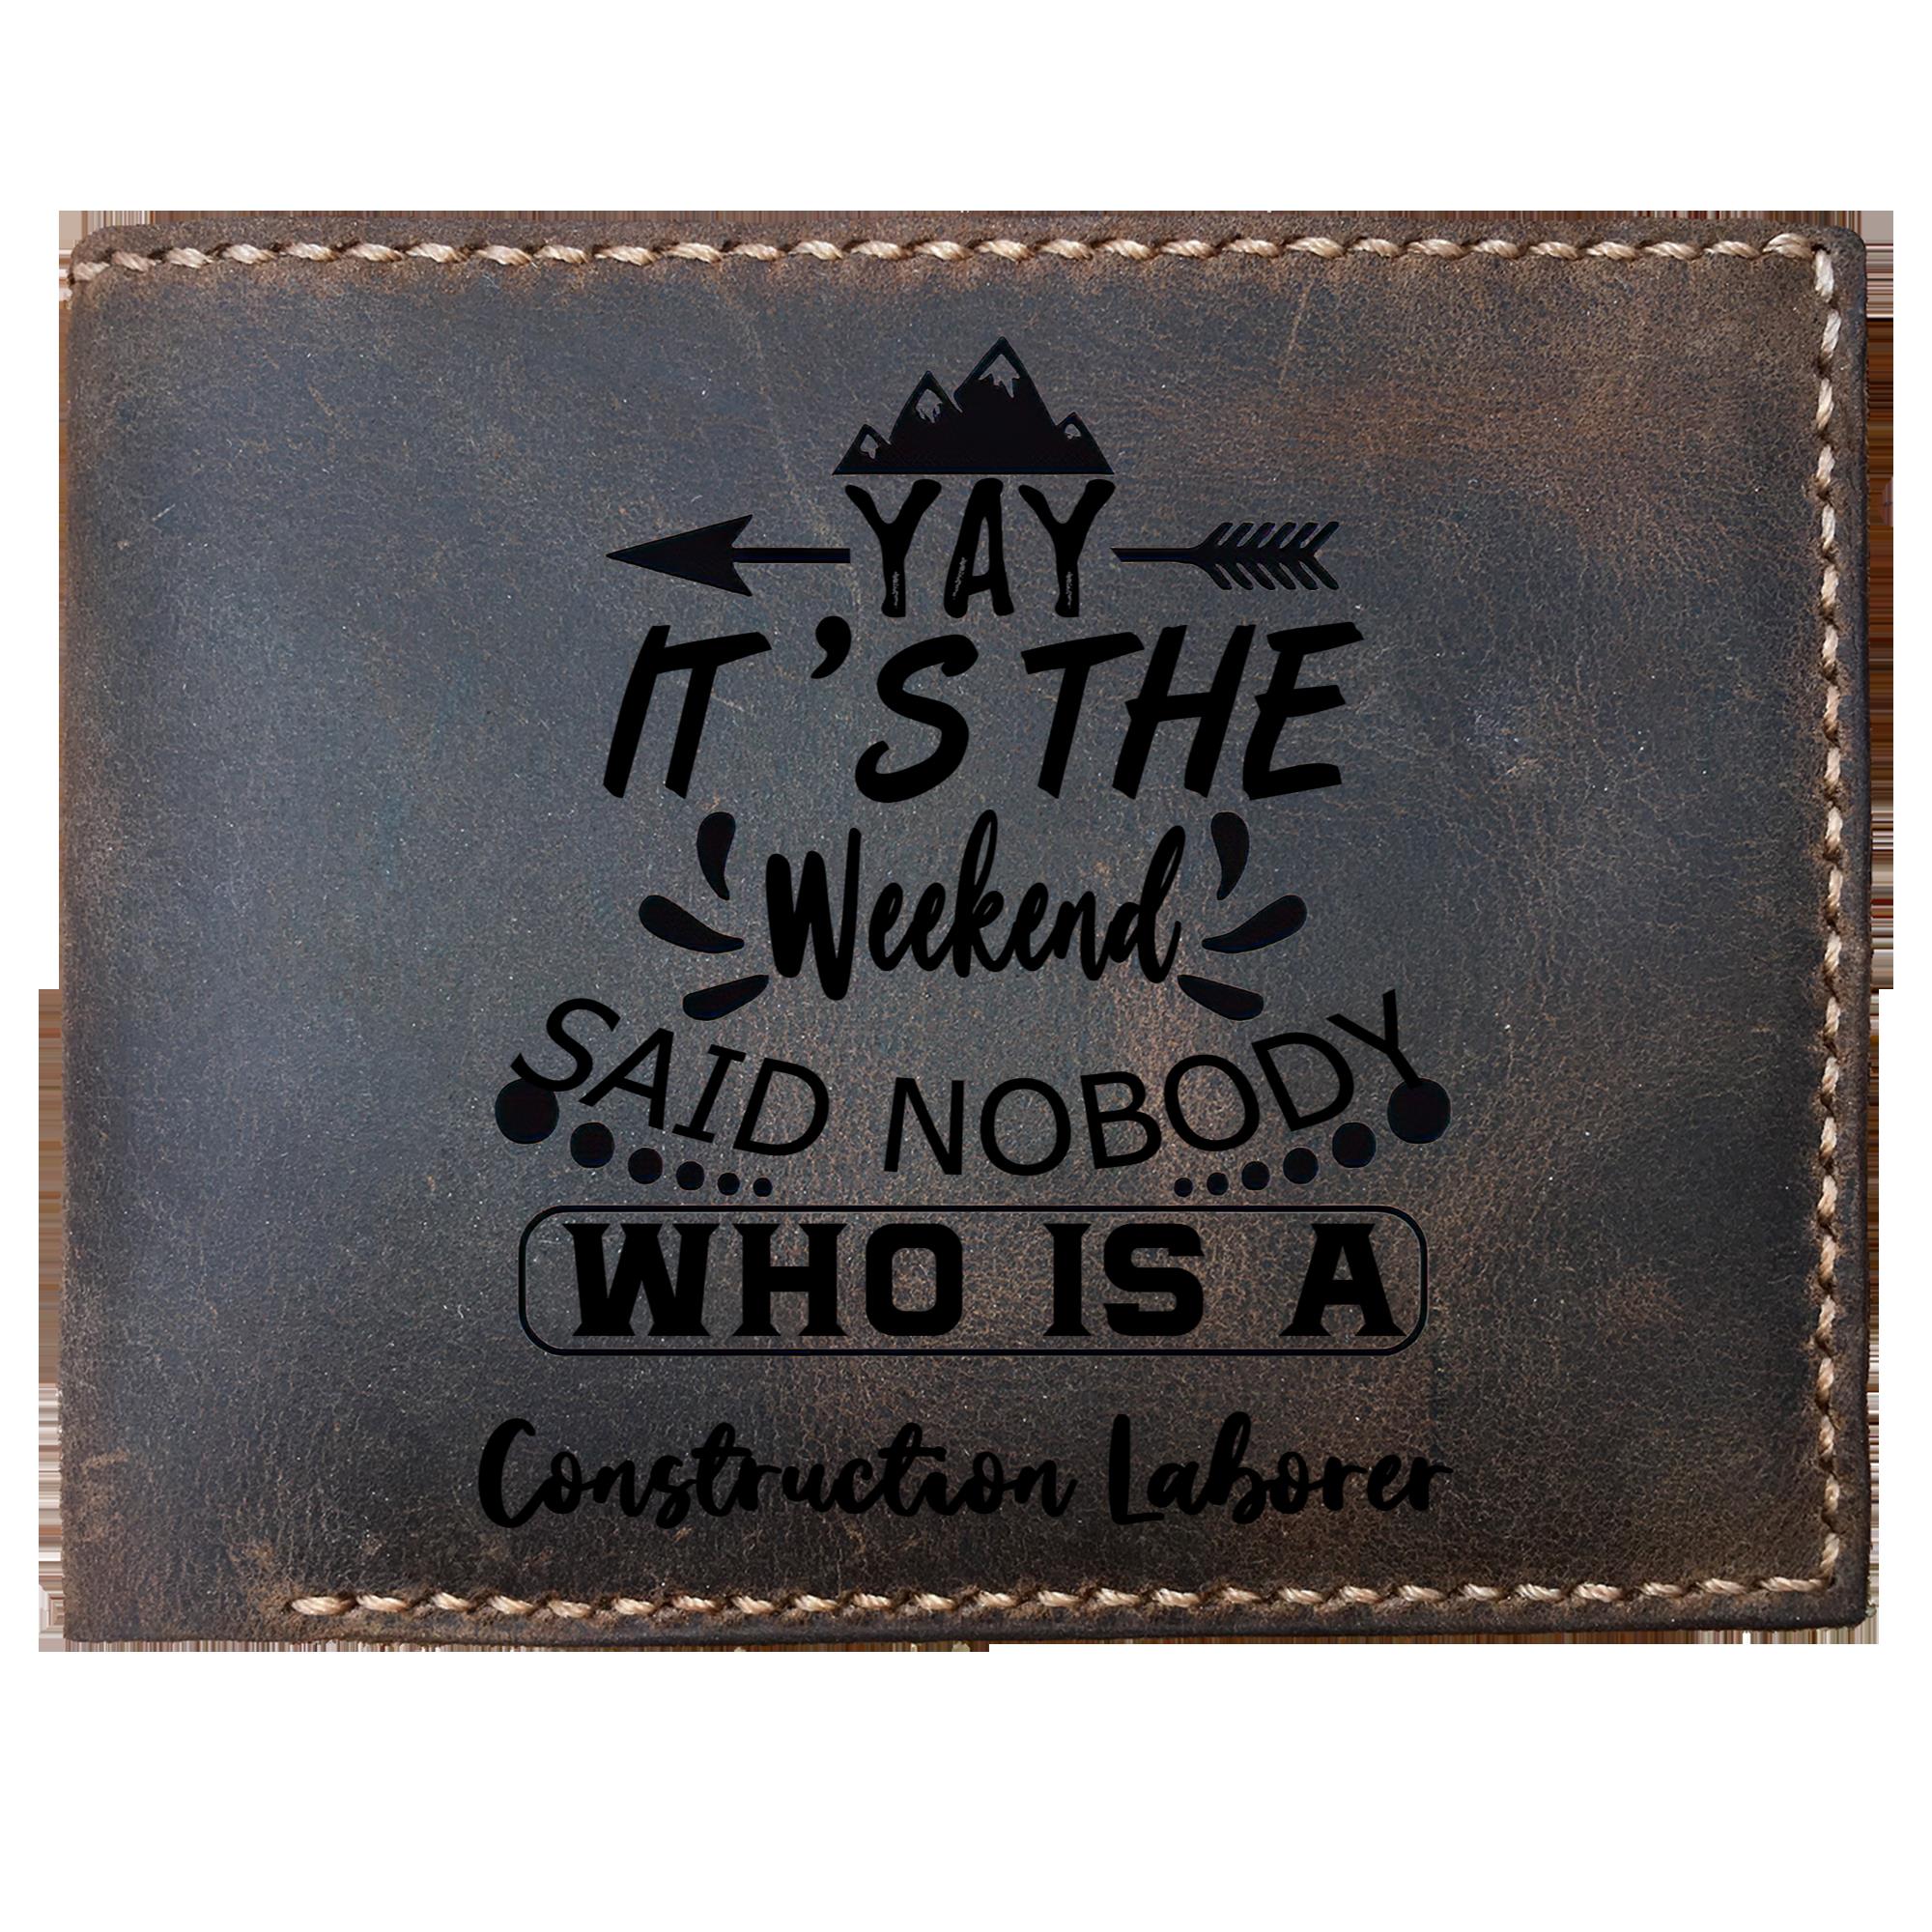 Skitongifts Funny Custom Laser Engraved Bifold Leather Wallet For Men, It's The Weekend Said Nobody Who Is A Construction Laborer, Father's Day Gifts